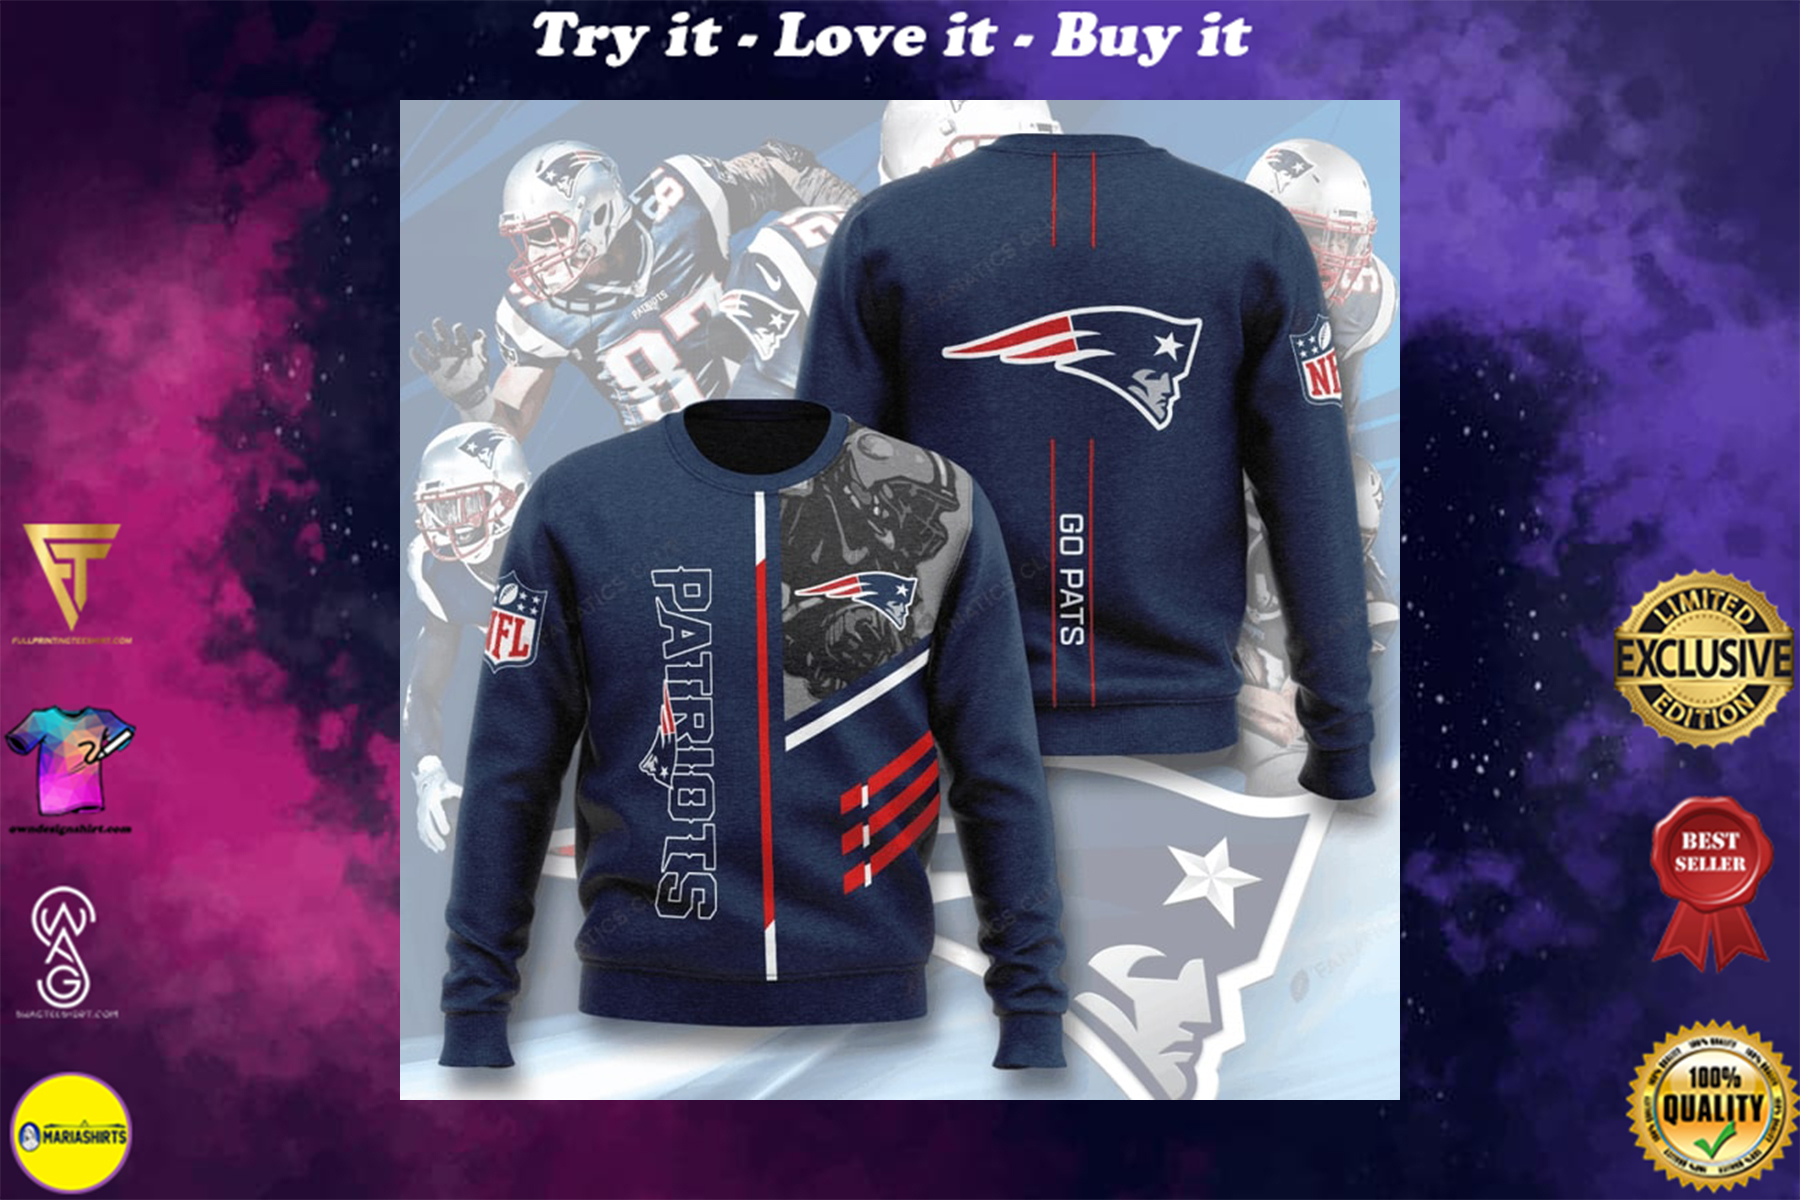 national football league new england patriots go pats full printing ugly sweater